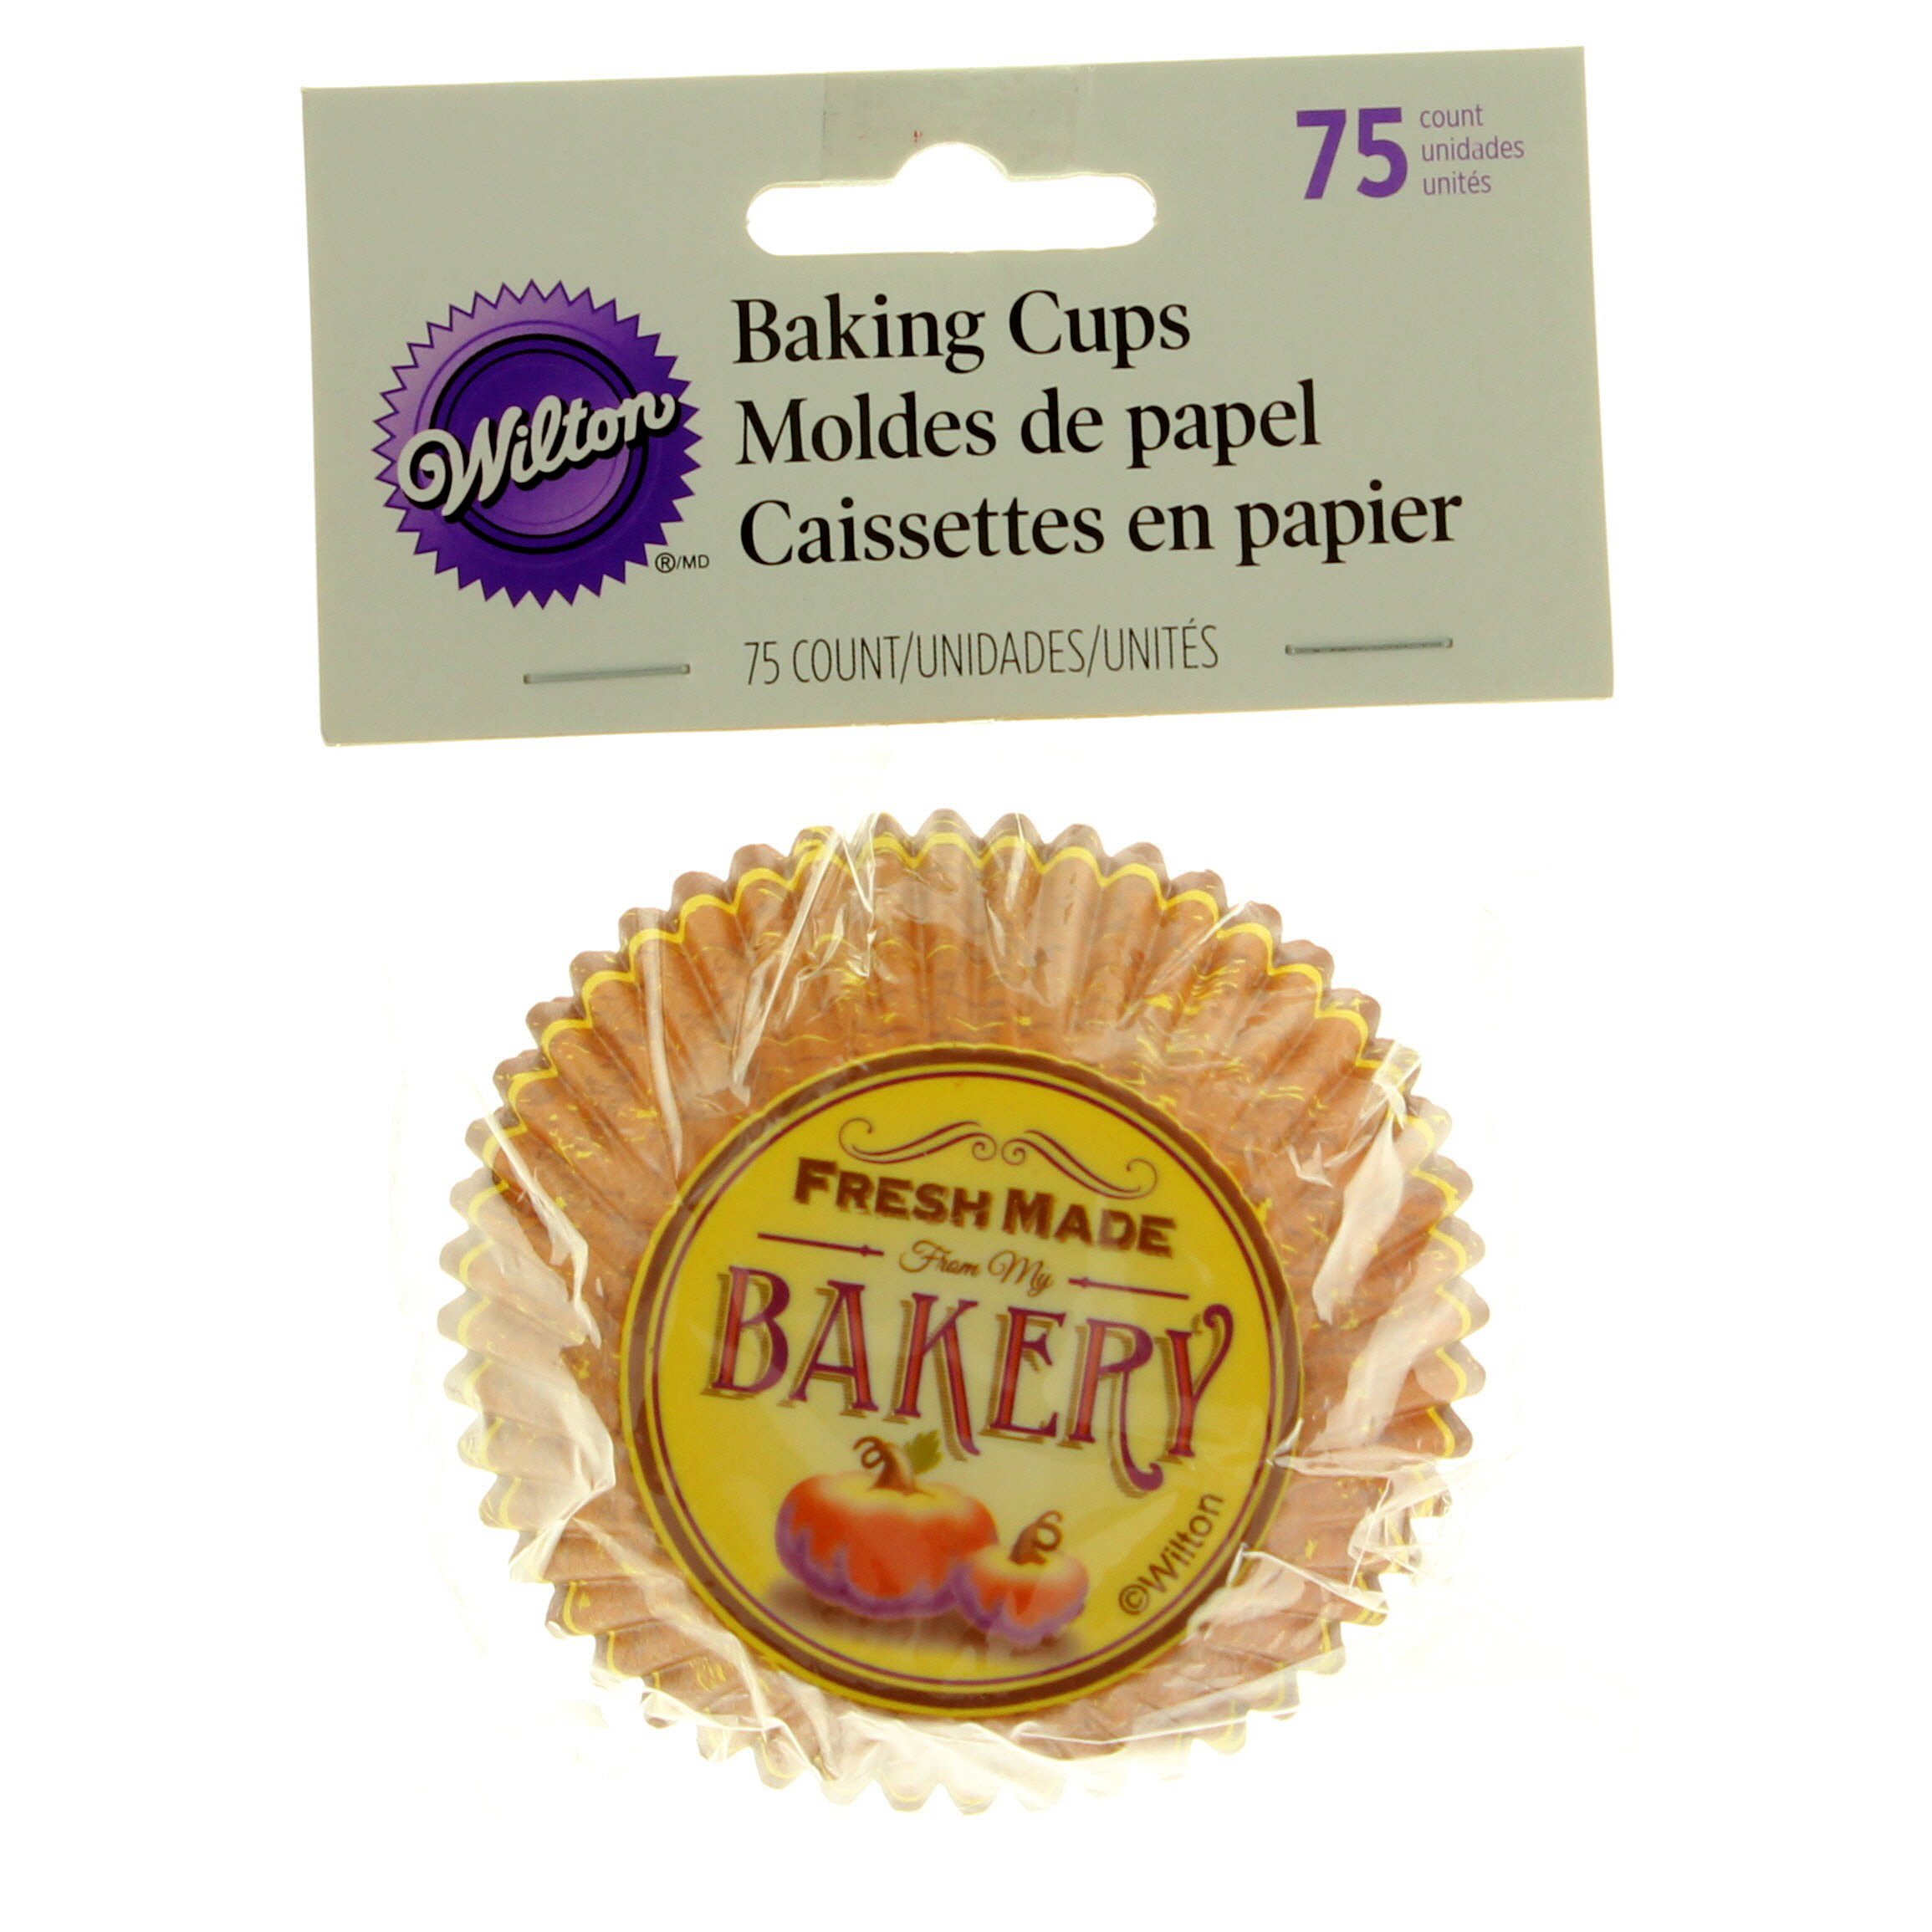 Reynolds Kitchens Jumbo 3.5 in Foil Baking Cups - Shop Baking Paper &  Liners at H-E-B